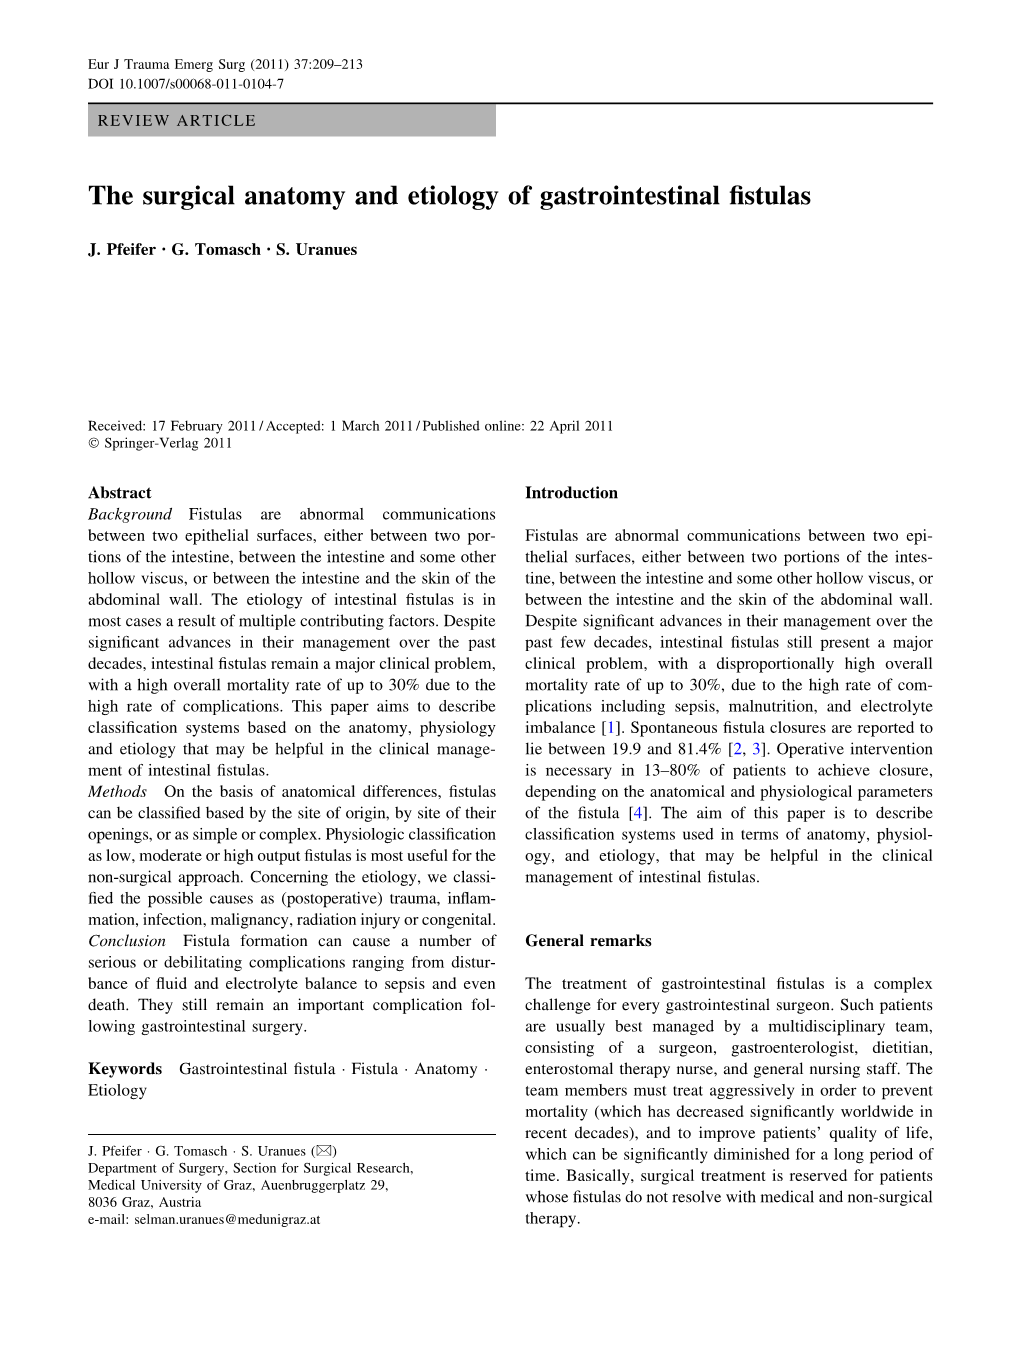 The Surgical Anatomy and Etiology of Gastrointestinal Fistulas